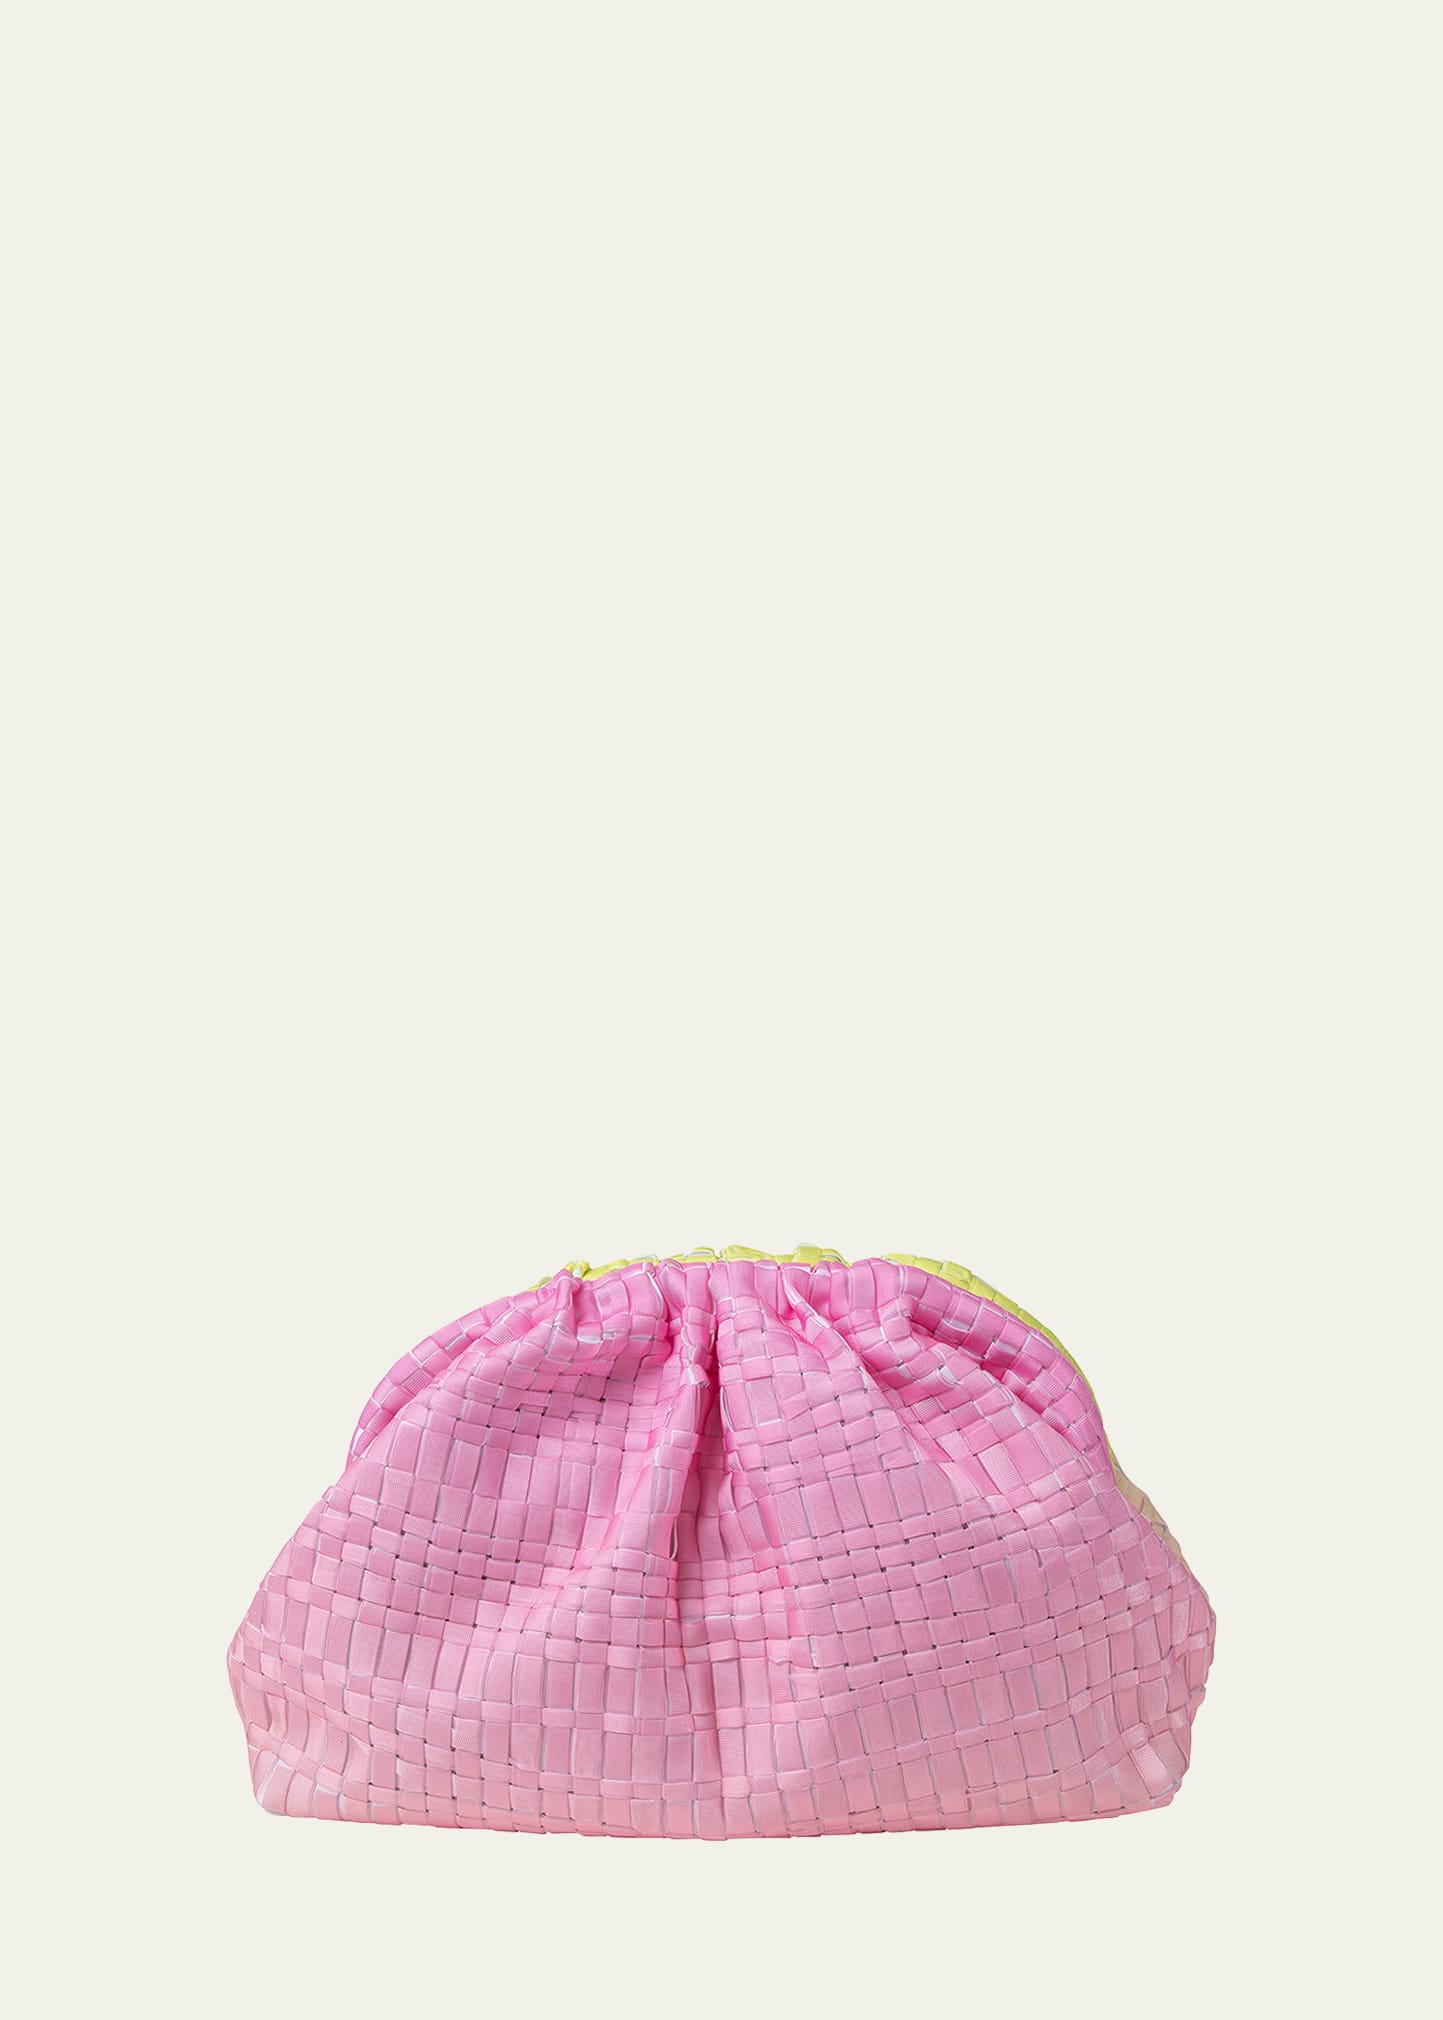 Maria La Rosa Mineral Game Woven Clutch Bag In Pink